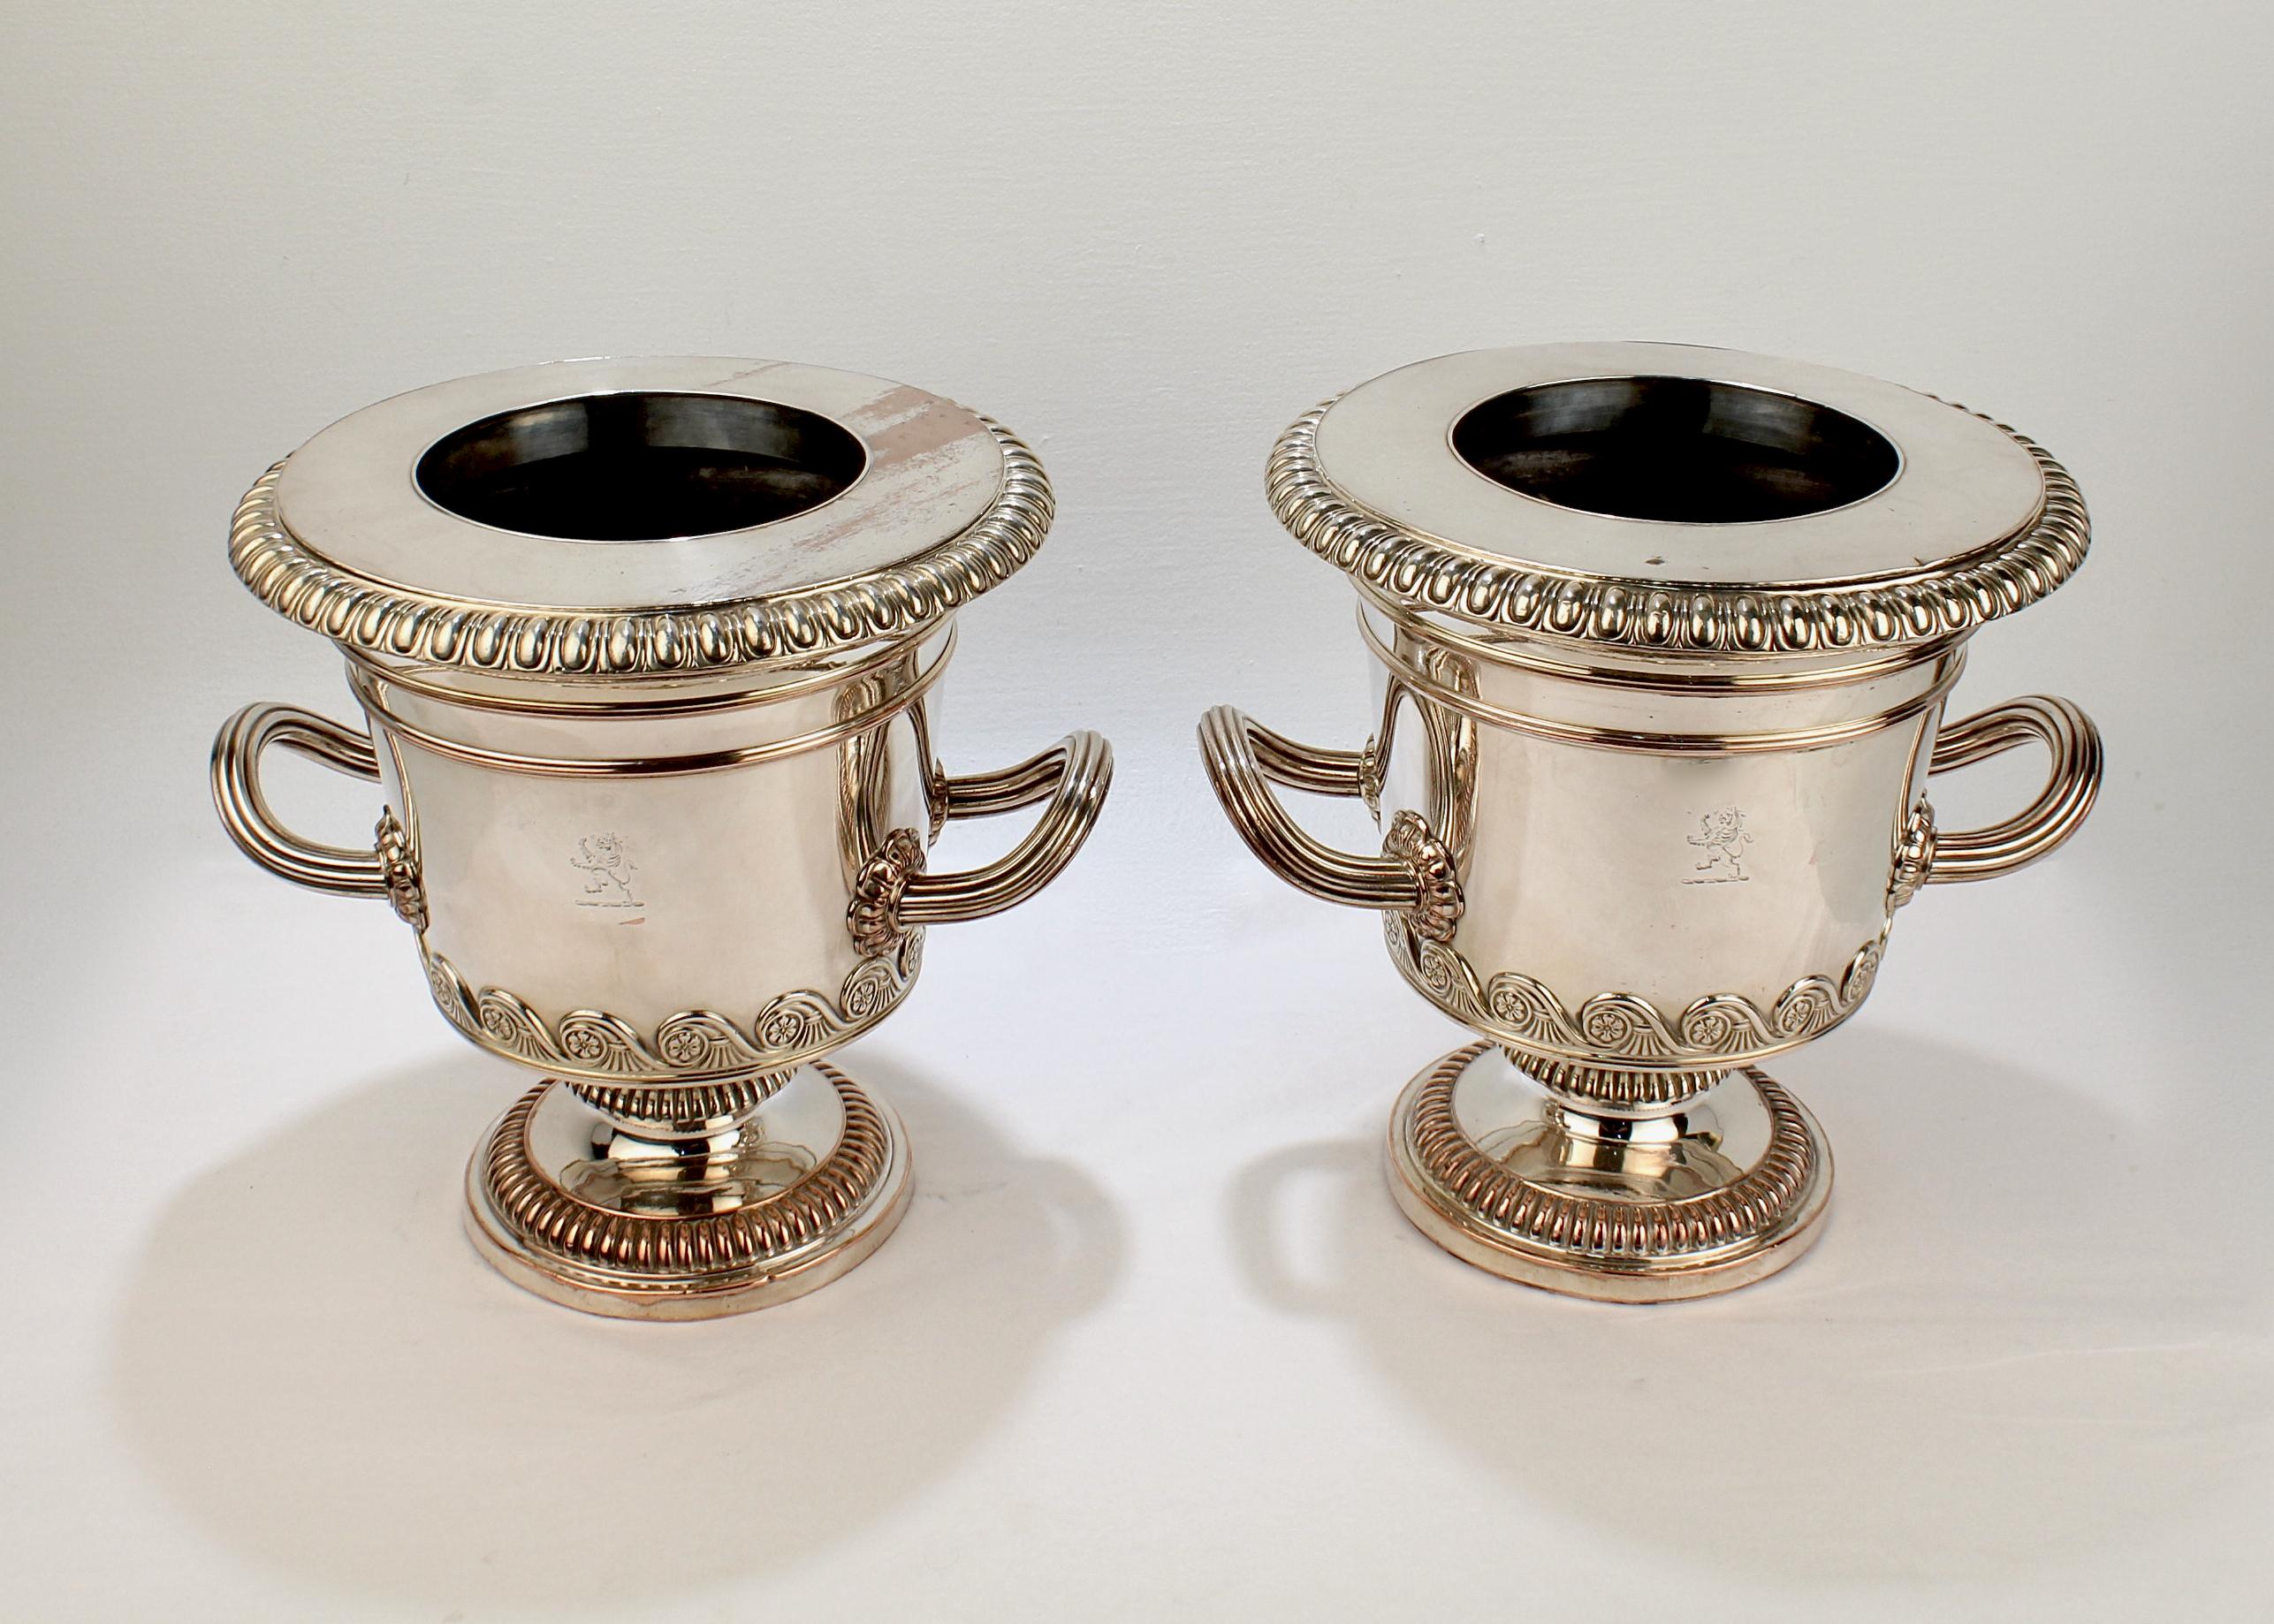 Regency Pair of Antique English Neoclassical Sheffield Plate Wine or Champagne Coolers